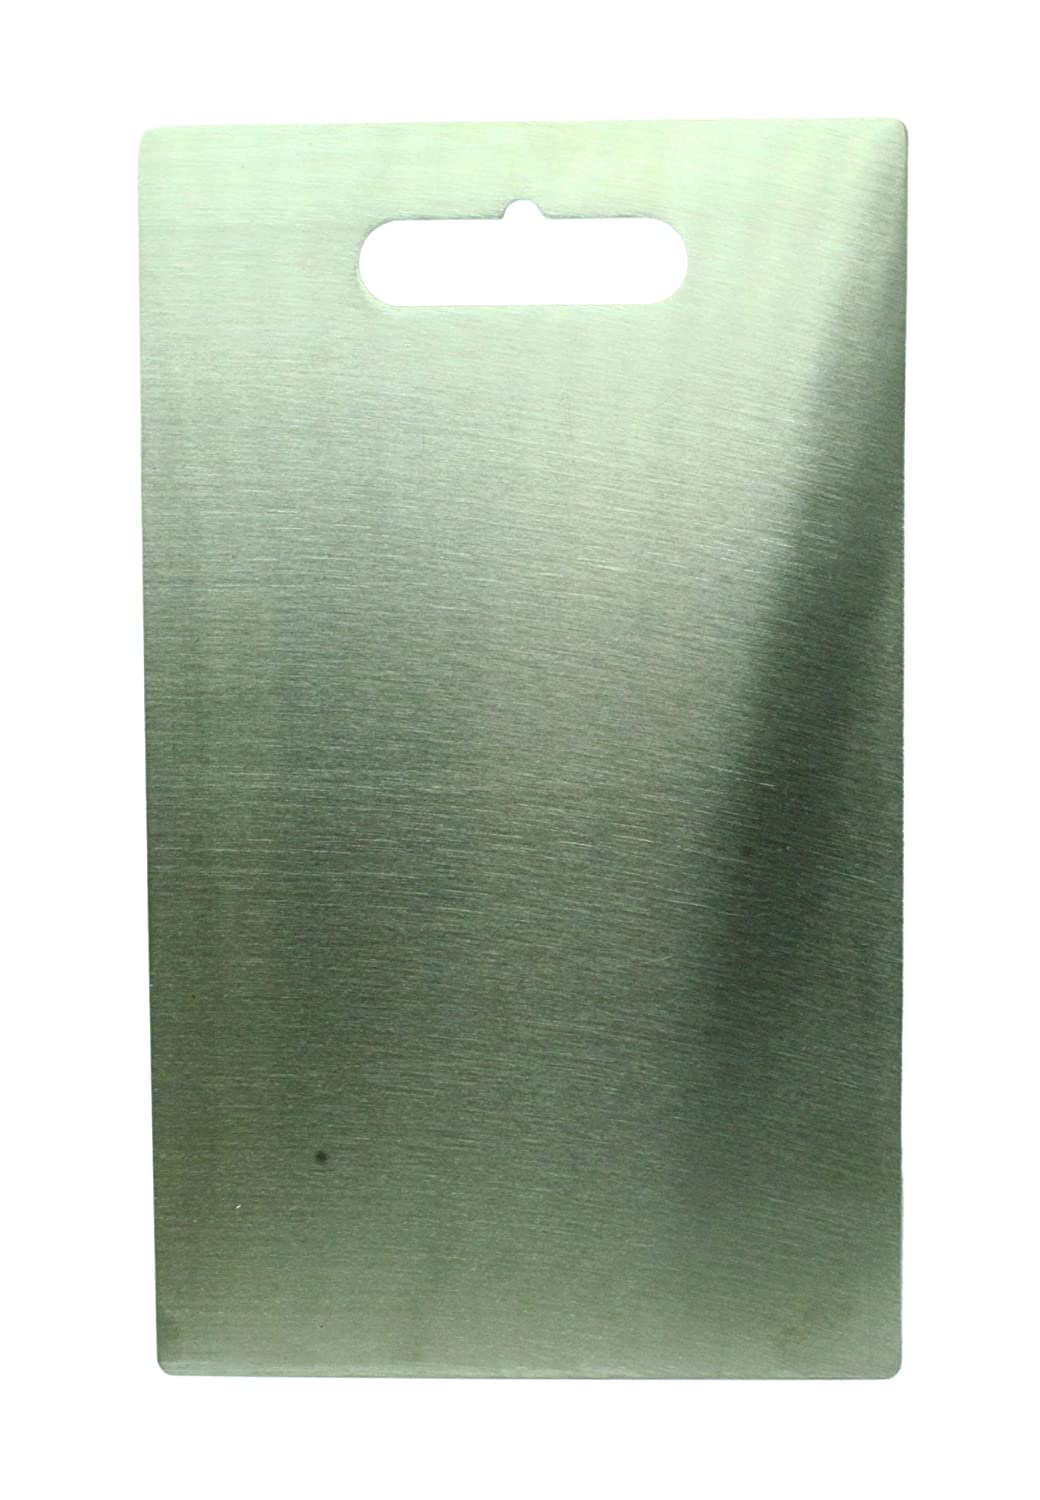 Stainless Steel Chopping | Vegetable Cutting Board (Thickness-2mm)